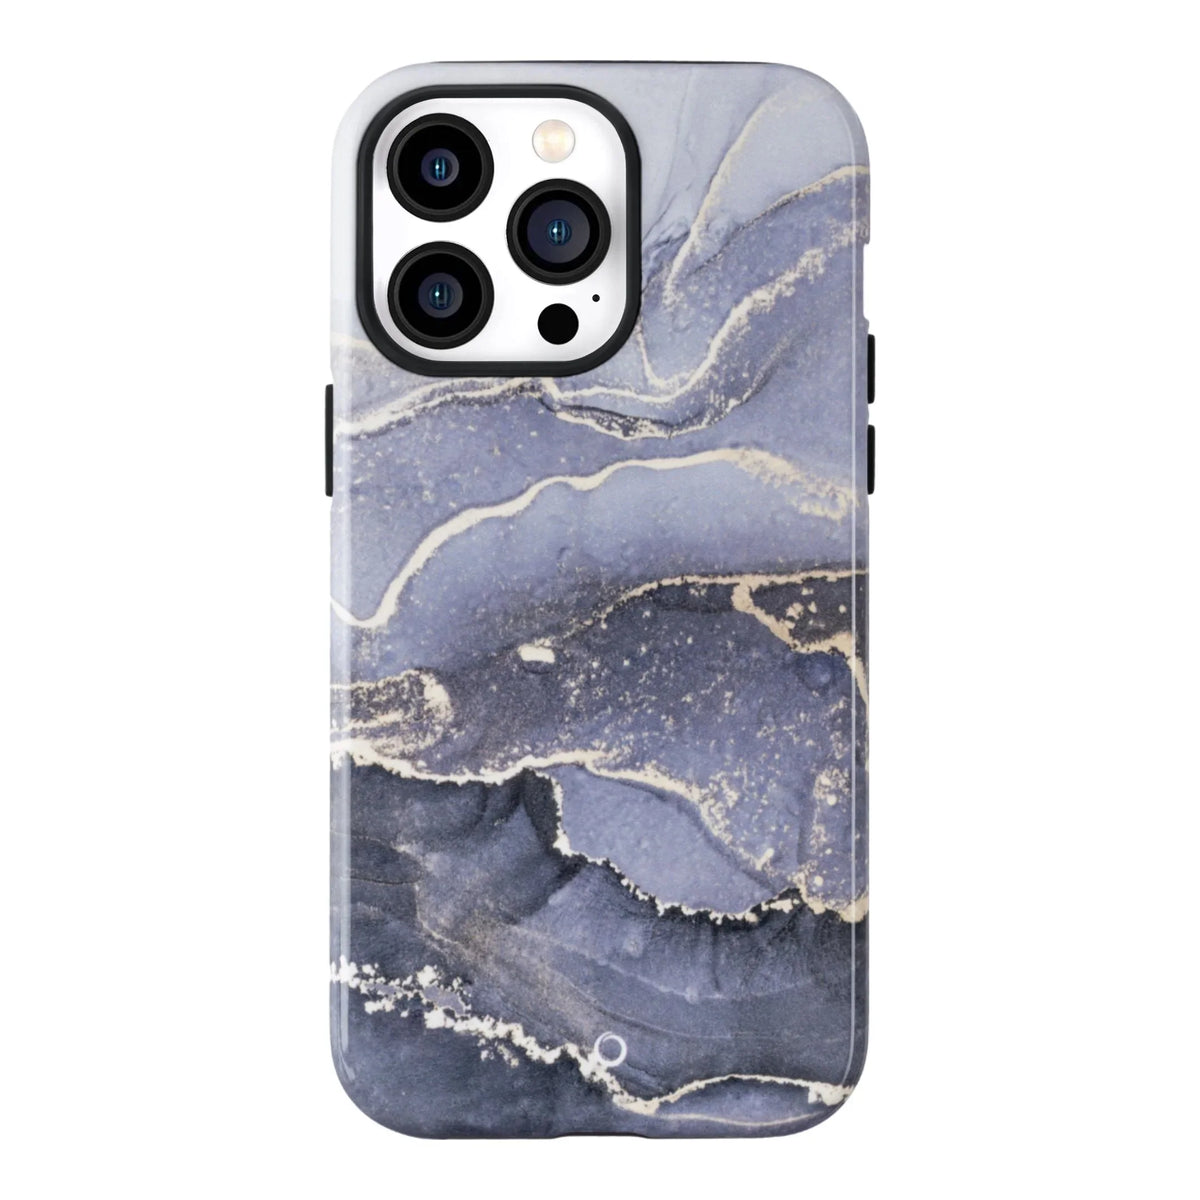 Charcoal Marble iPhone Case - iPhone 12 Pro Max